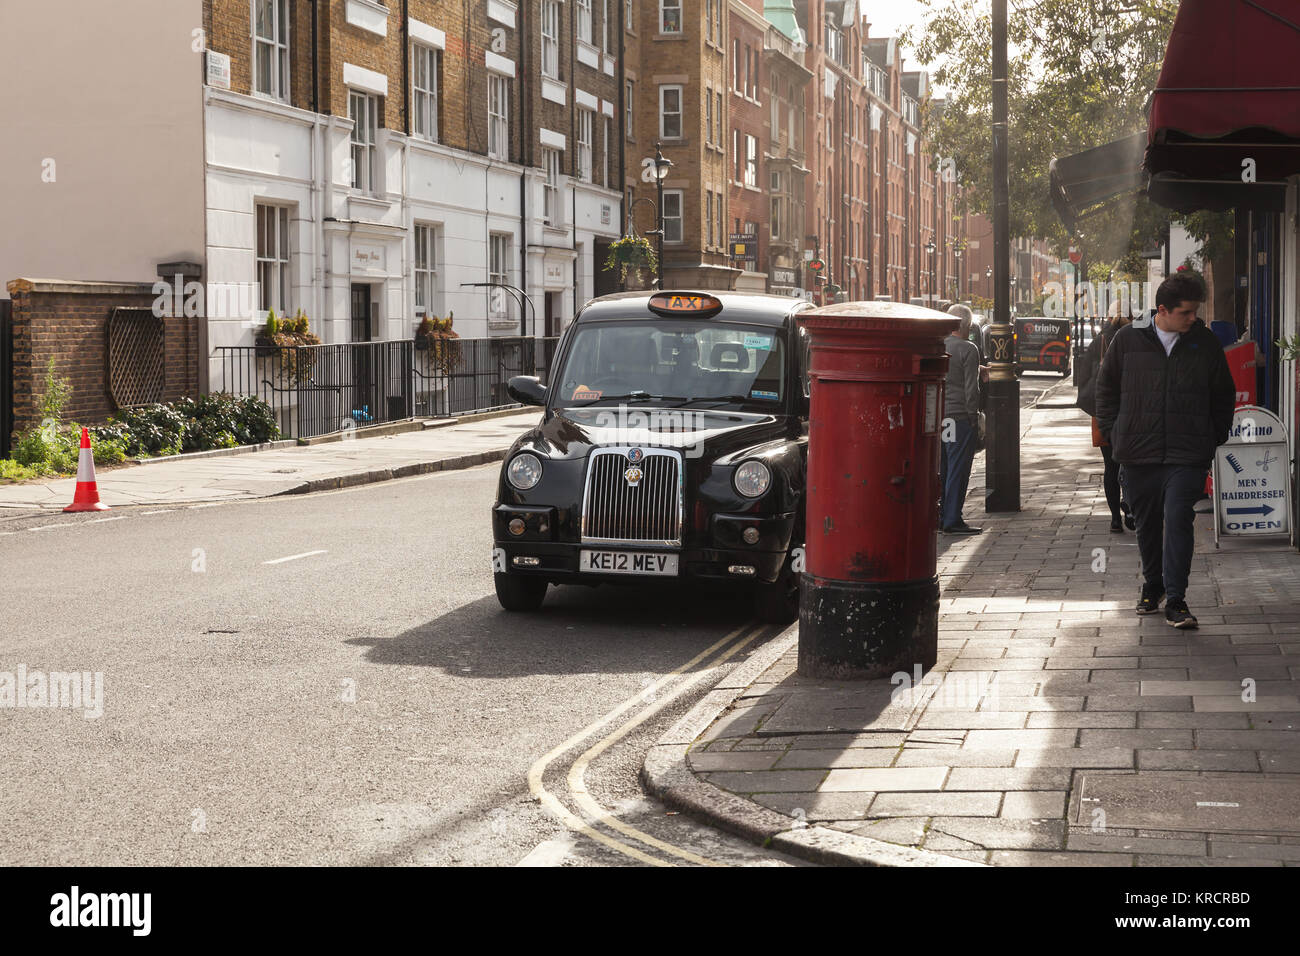 London, United Kingdom - October 30, 2017: Black taxi cab by The London Taxi Company stands on the street Stock Photo